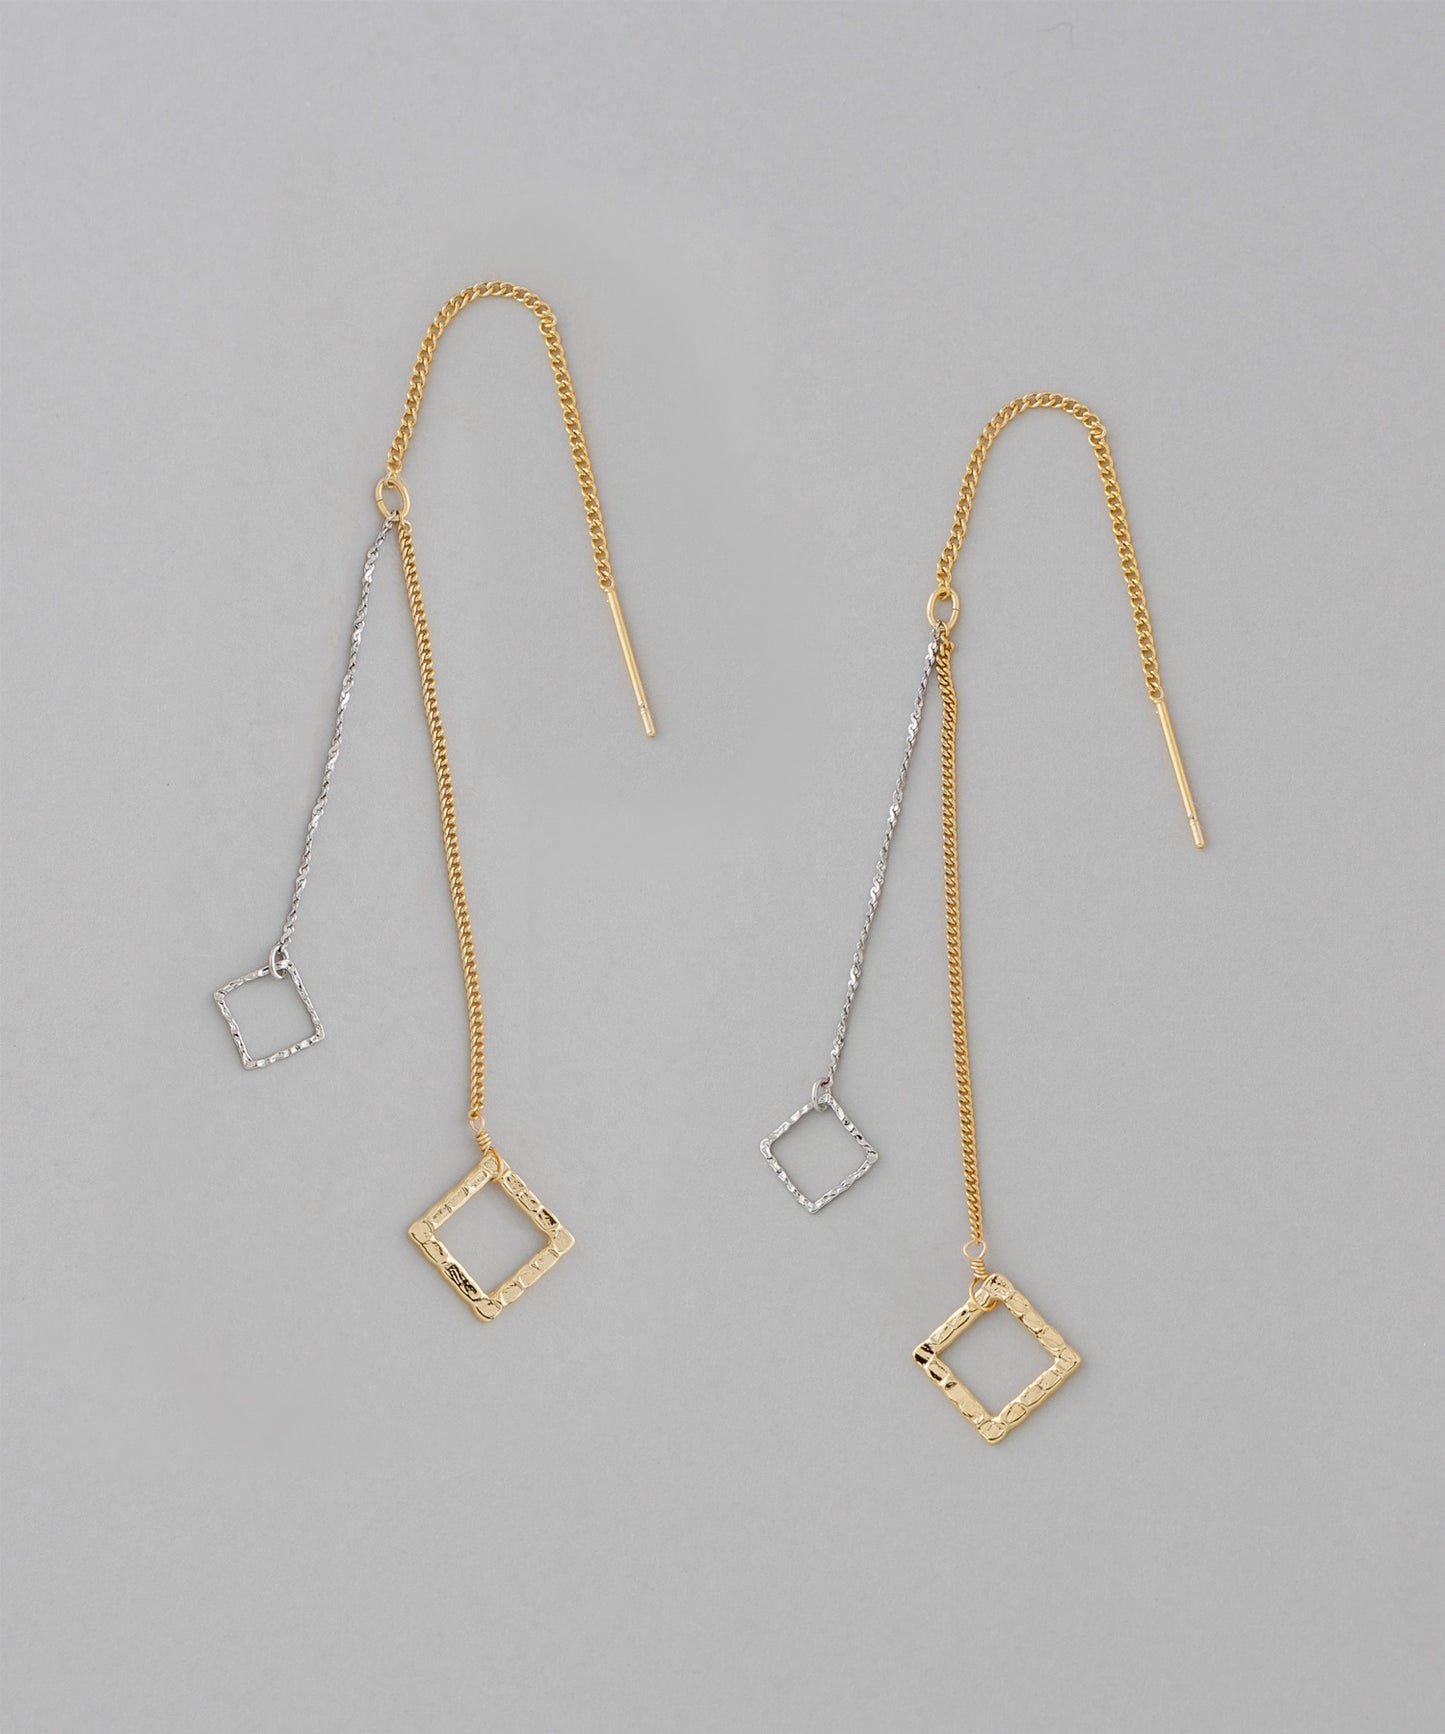 【Online Store Limited】Bicolor Square Long Earrings